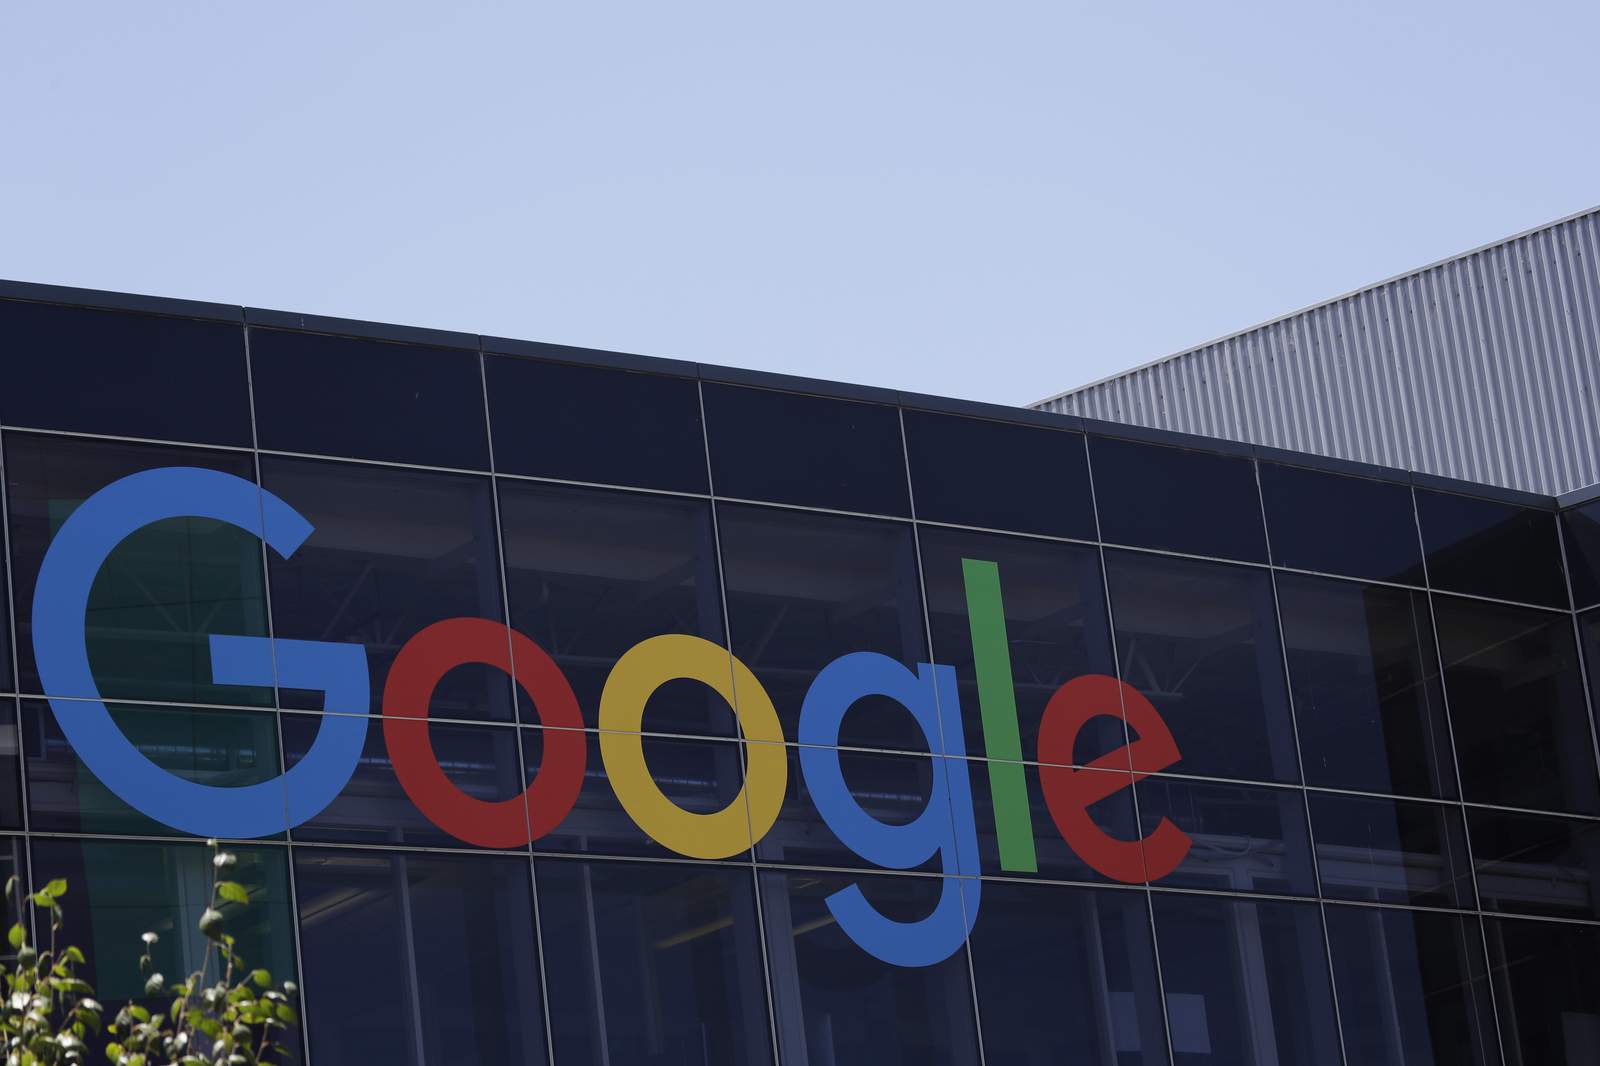 Google will offer career certificates, equivalent to 4-year degrees in data analytics, project management